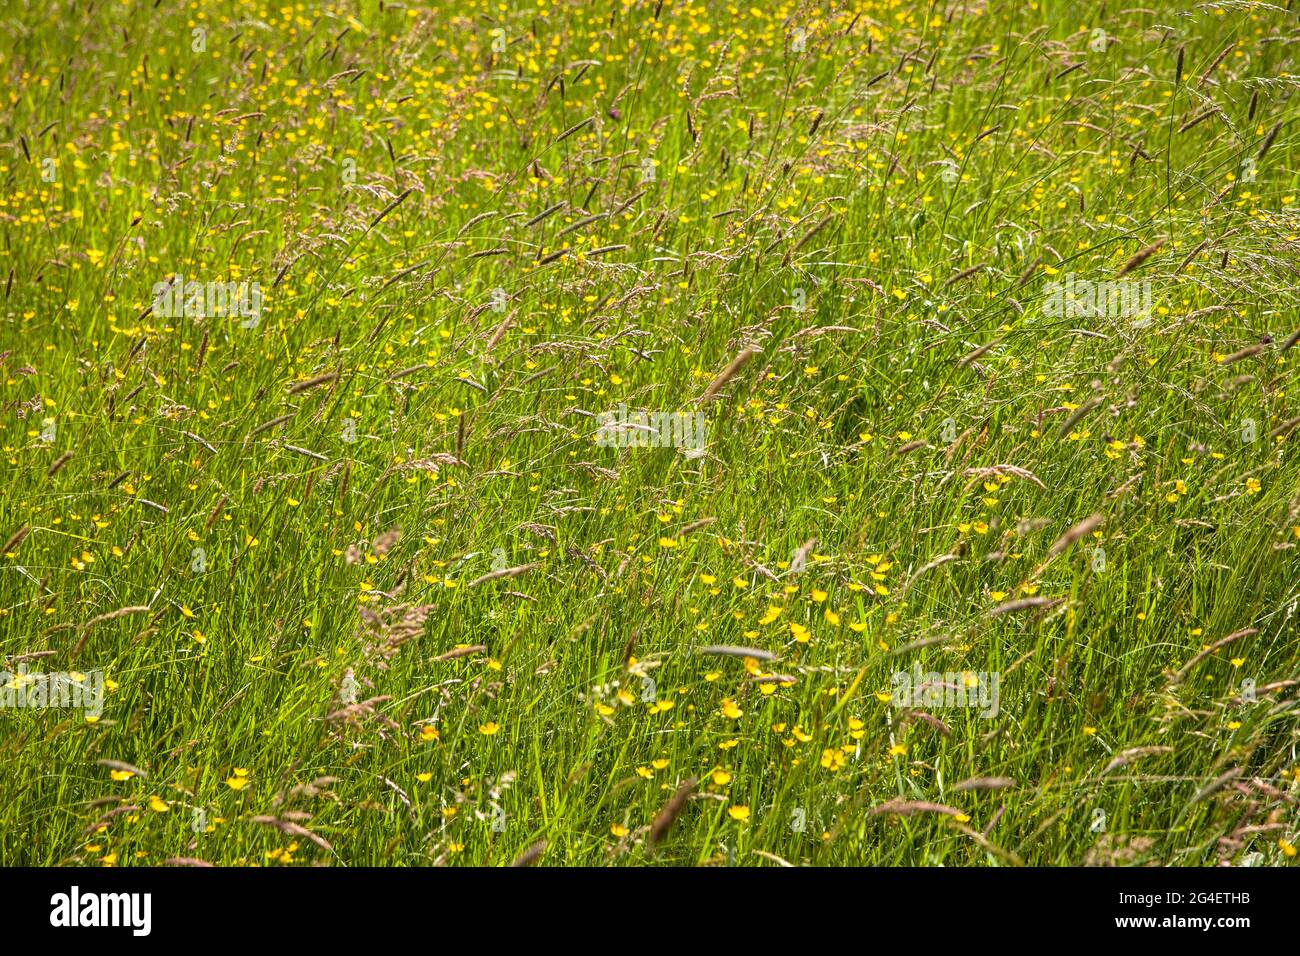 meadow in the Hoenne valley between Hemer and Balve, yellow blossoms of buttercup, Sauerland region, North Rhine-Westphalia, Germany.  Wiese im Hoenne Stock Photo